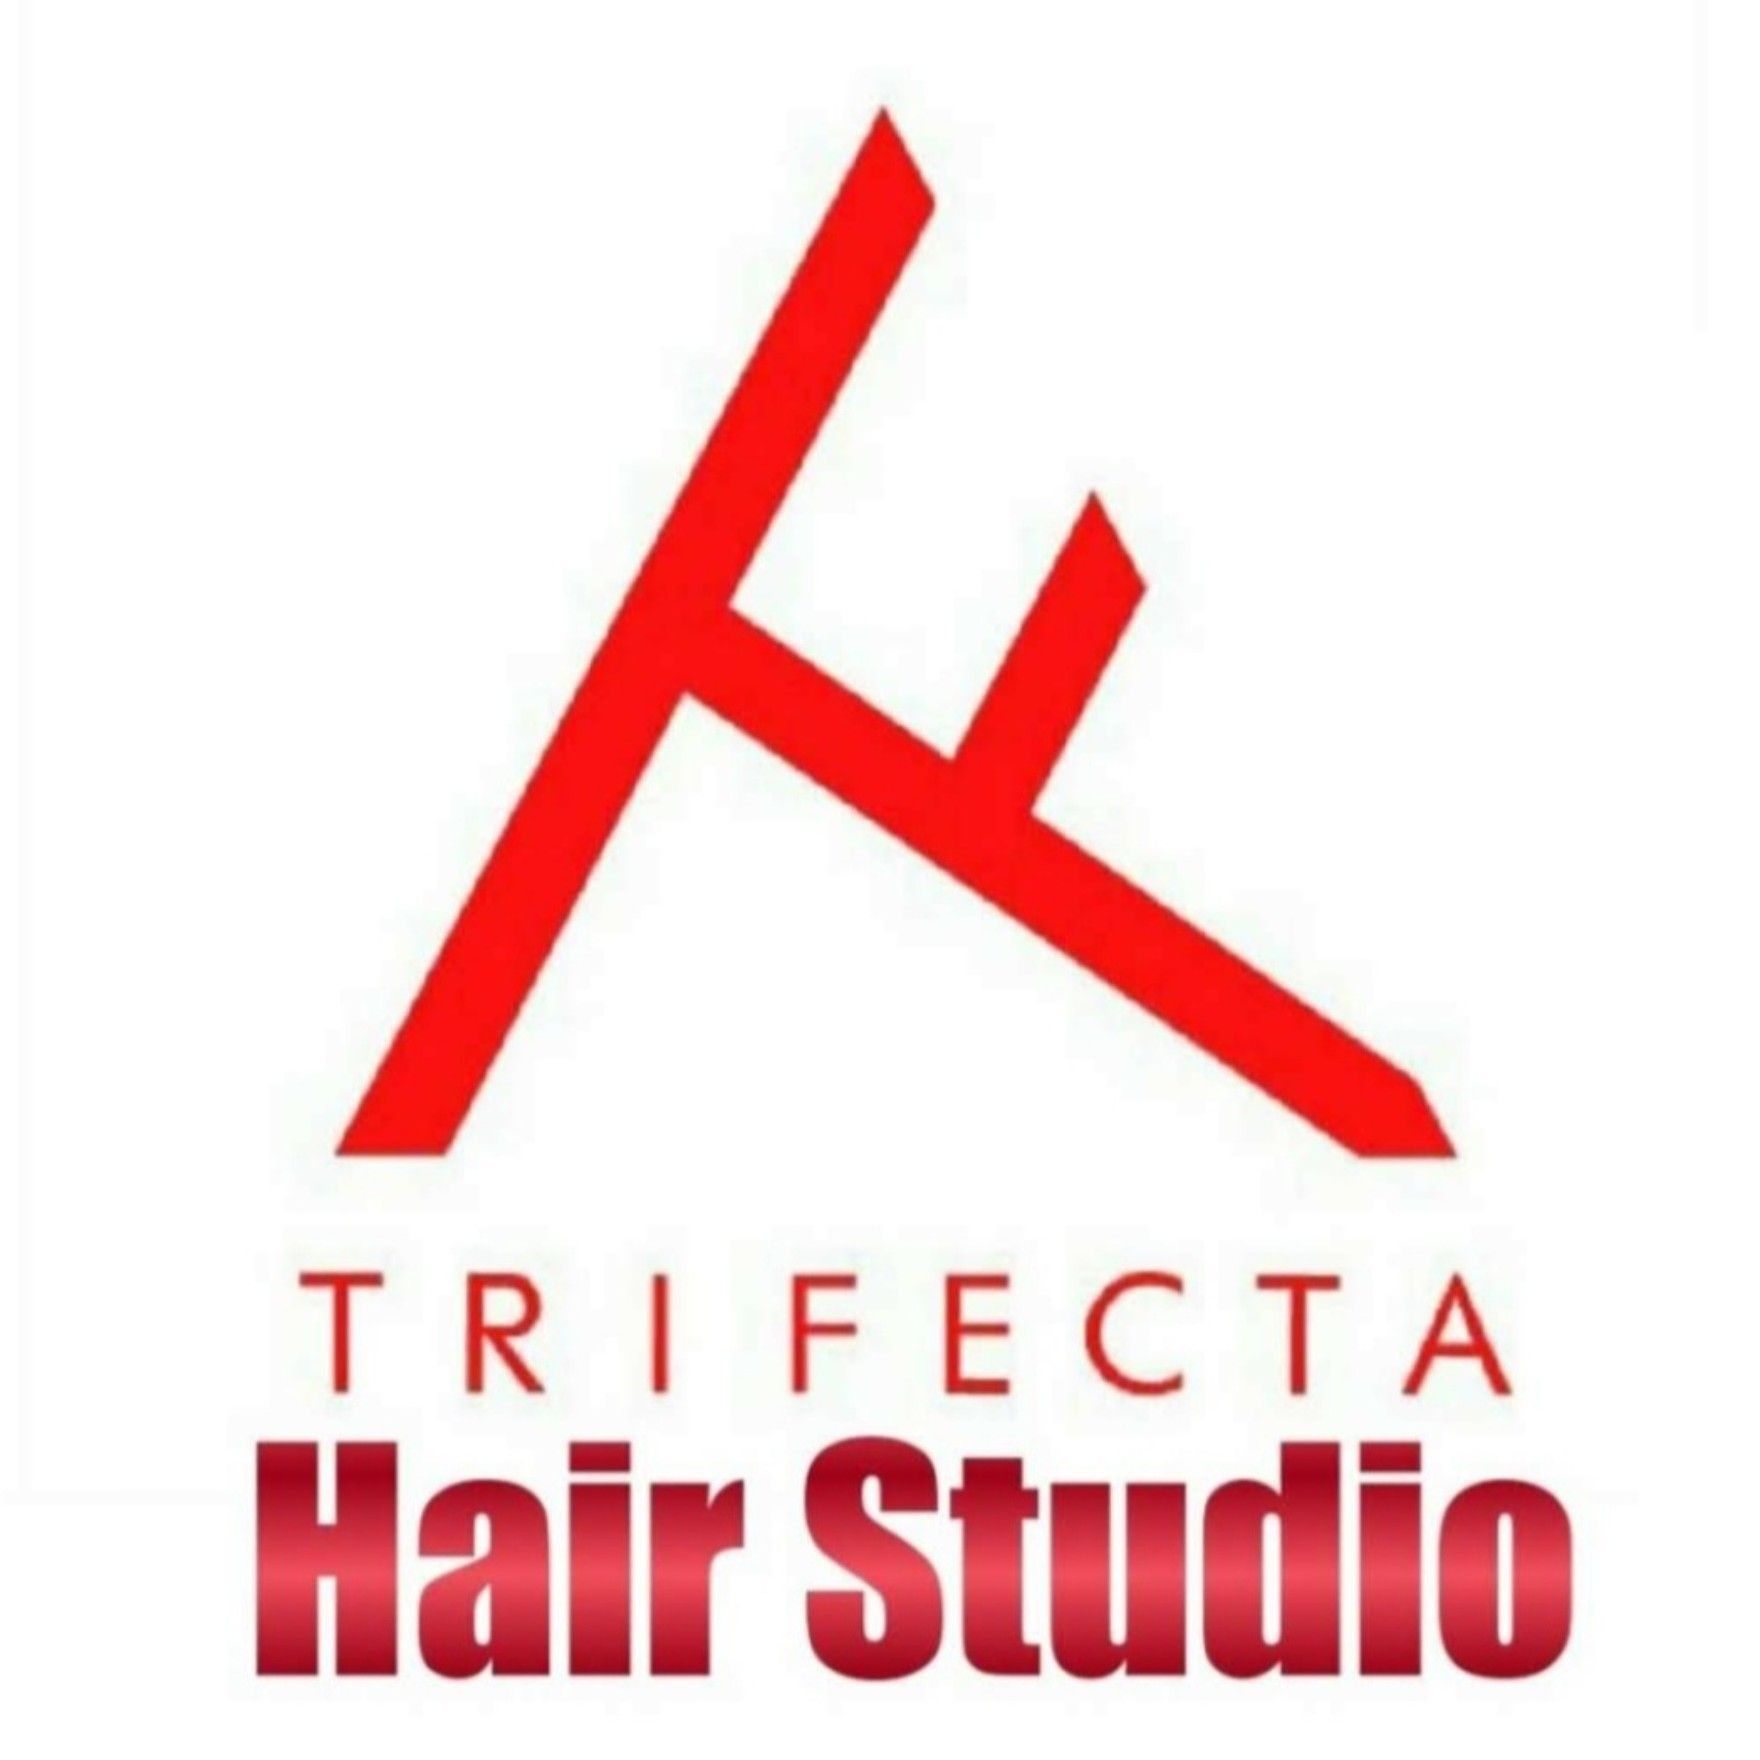 Trifecta Hair Studio, 2212 W Florence Ave, Los Angeles, 90043